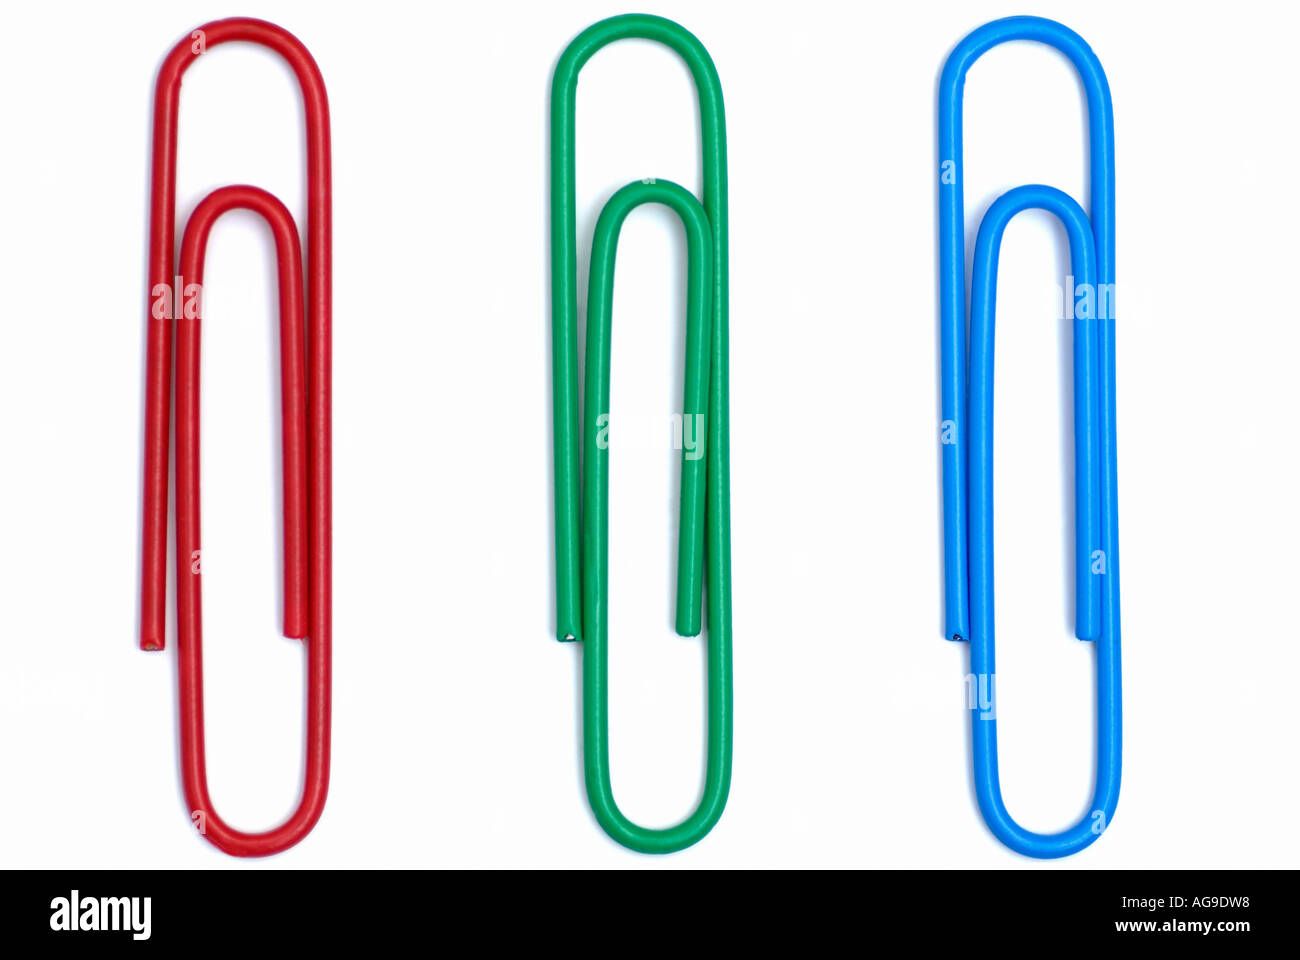 Office Paperclips against a White Background Three Objects Arranged as Red Green and Blue Stock Photo